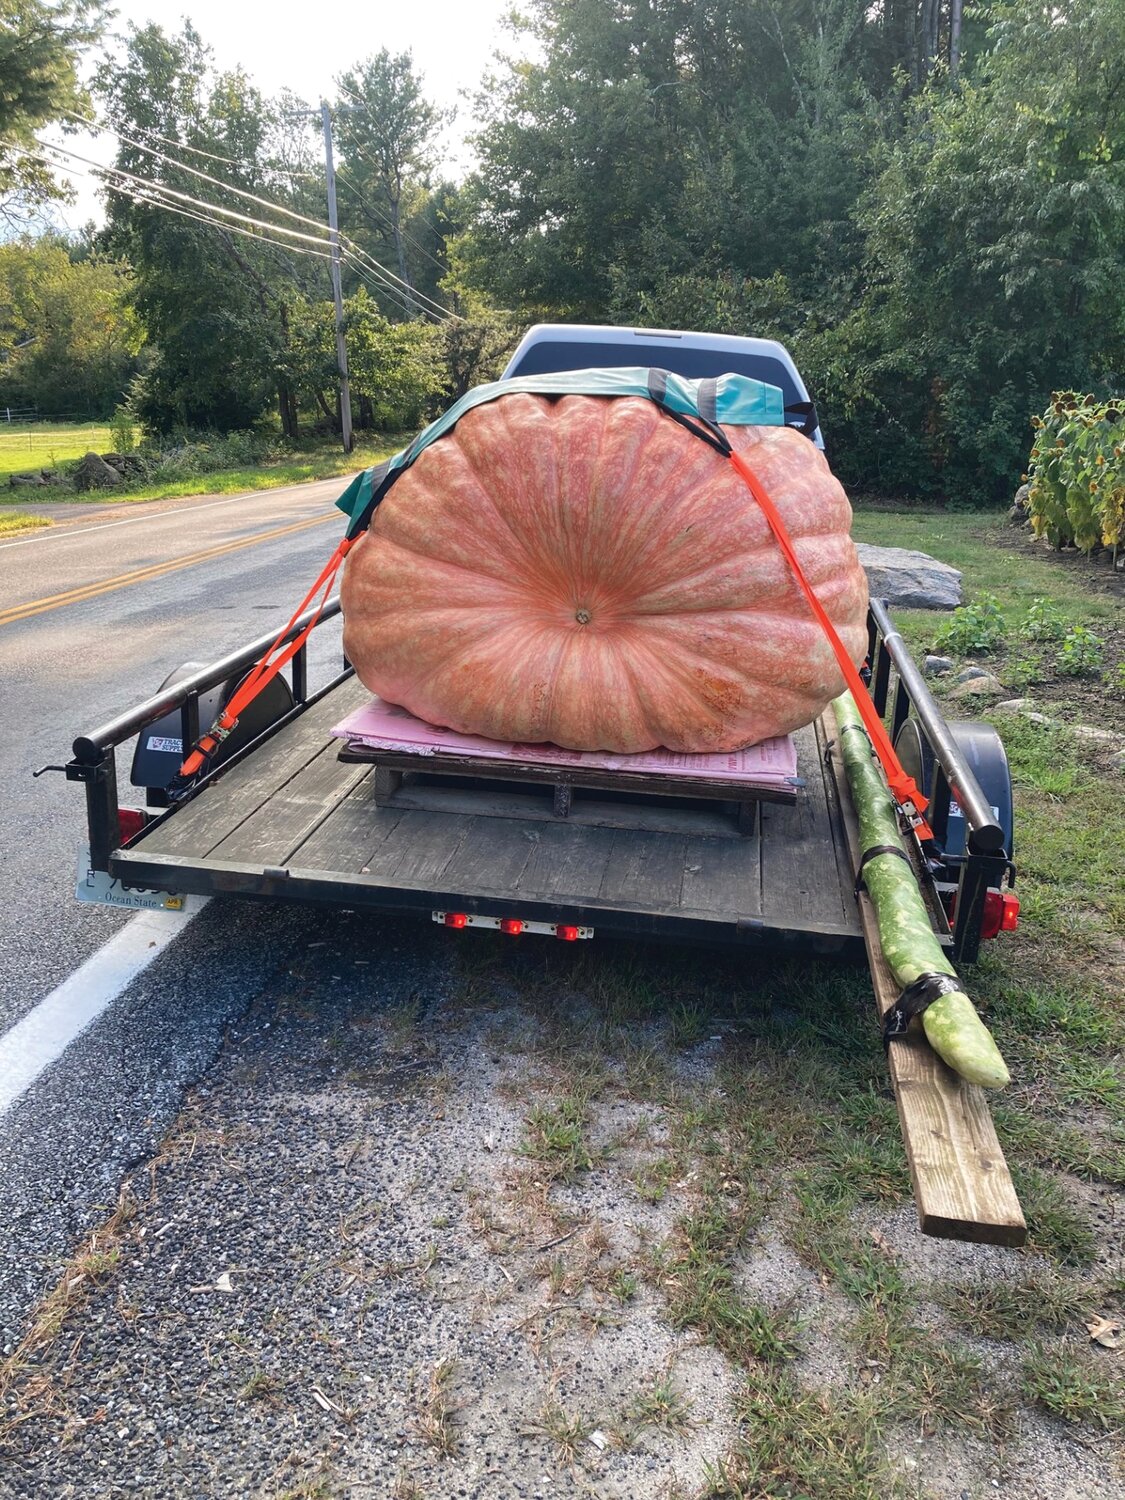 OVERSIZED LOAD: Steve Sperry said his pumpkins have grown too big to fit in the back of his pick-up truck. Now he rents a flatbed to transport his behemoths to weigh-ins throughout New England.